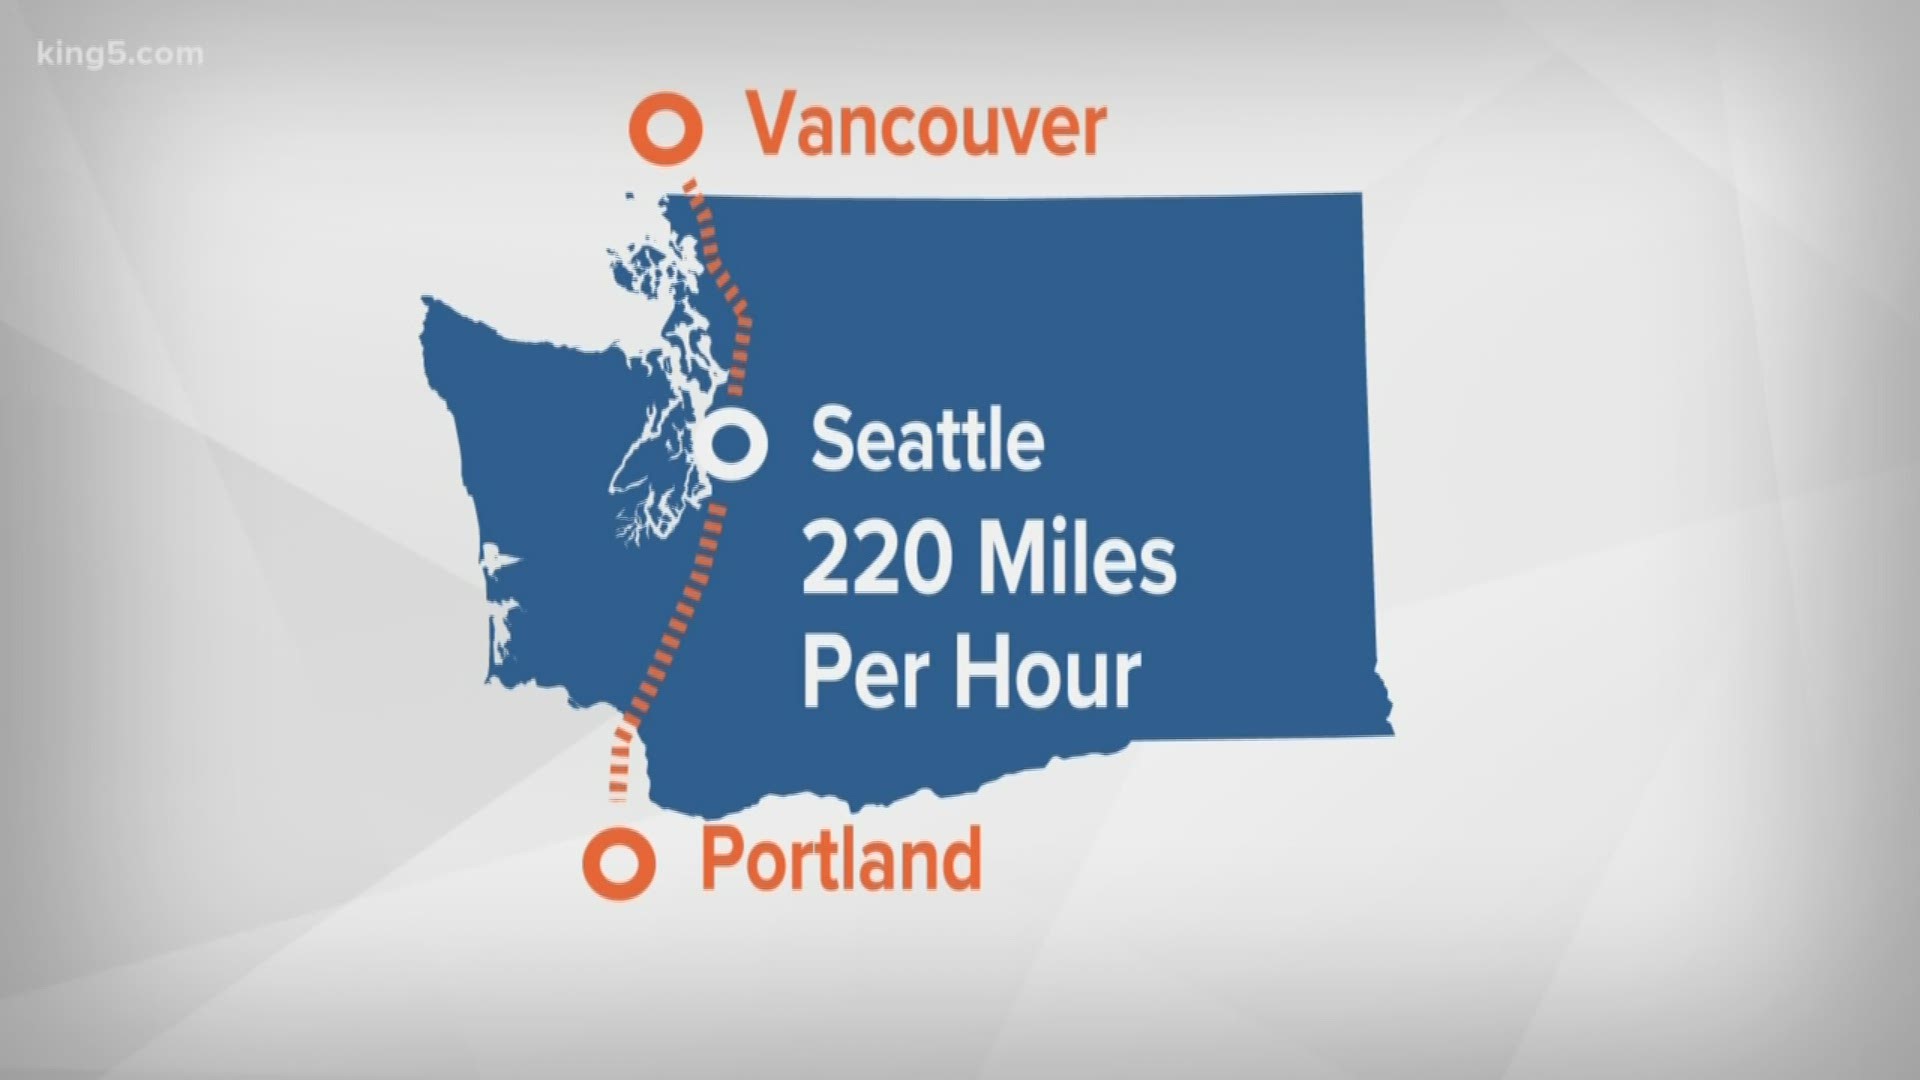 One day, people could be able to get from Seattle to Portland in an hour.